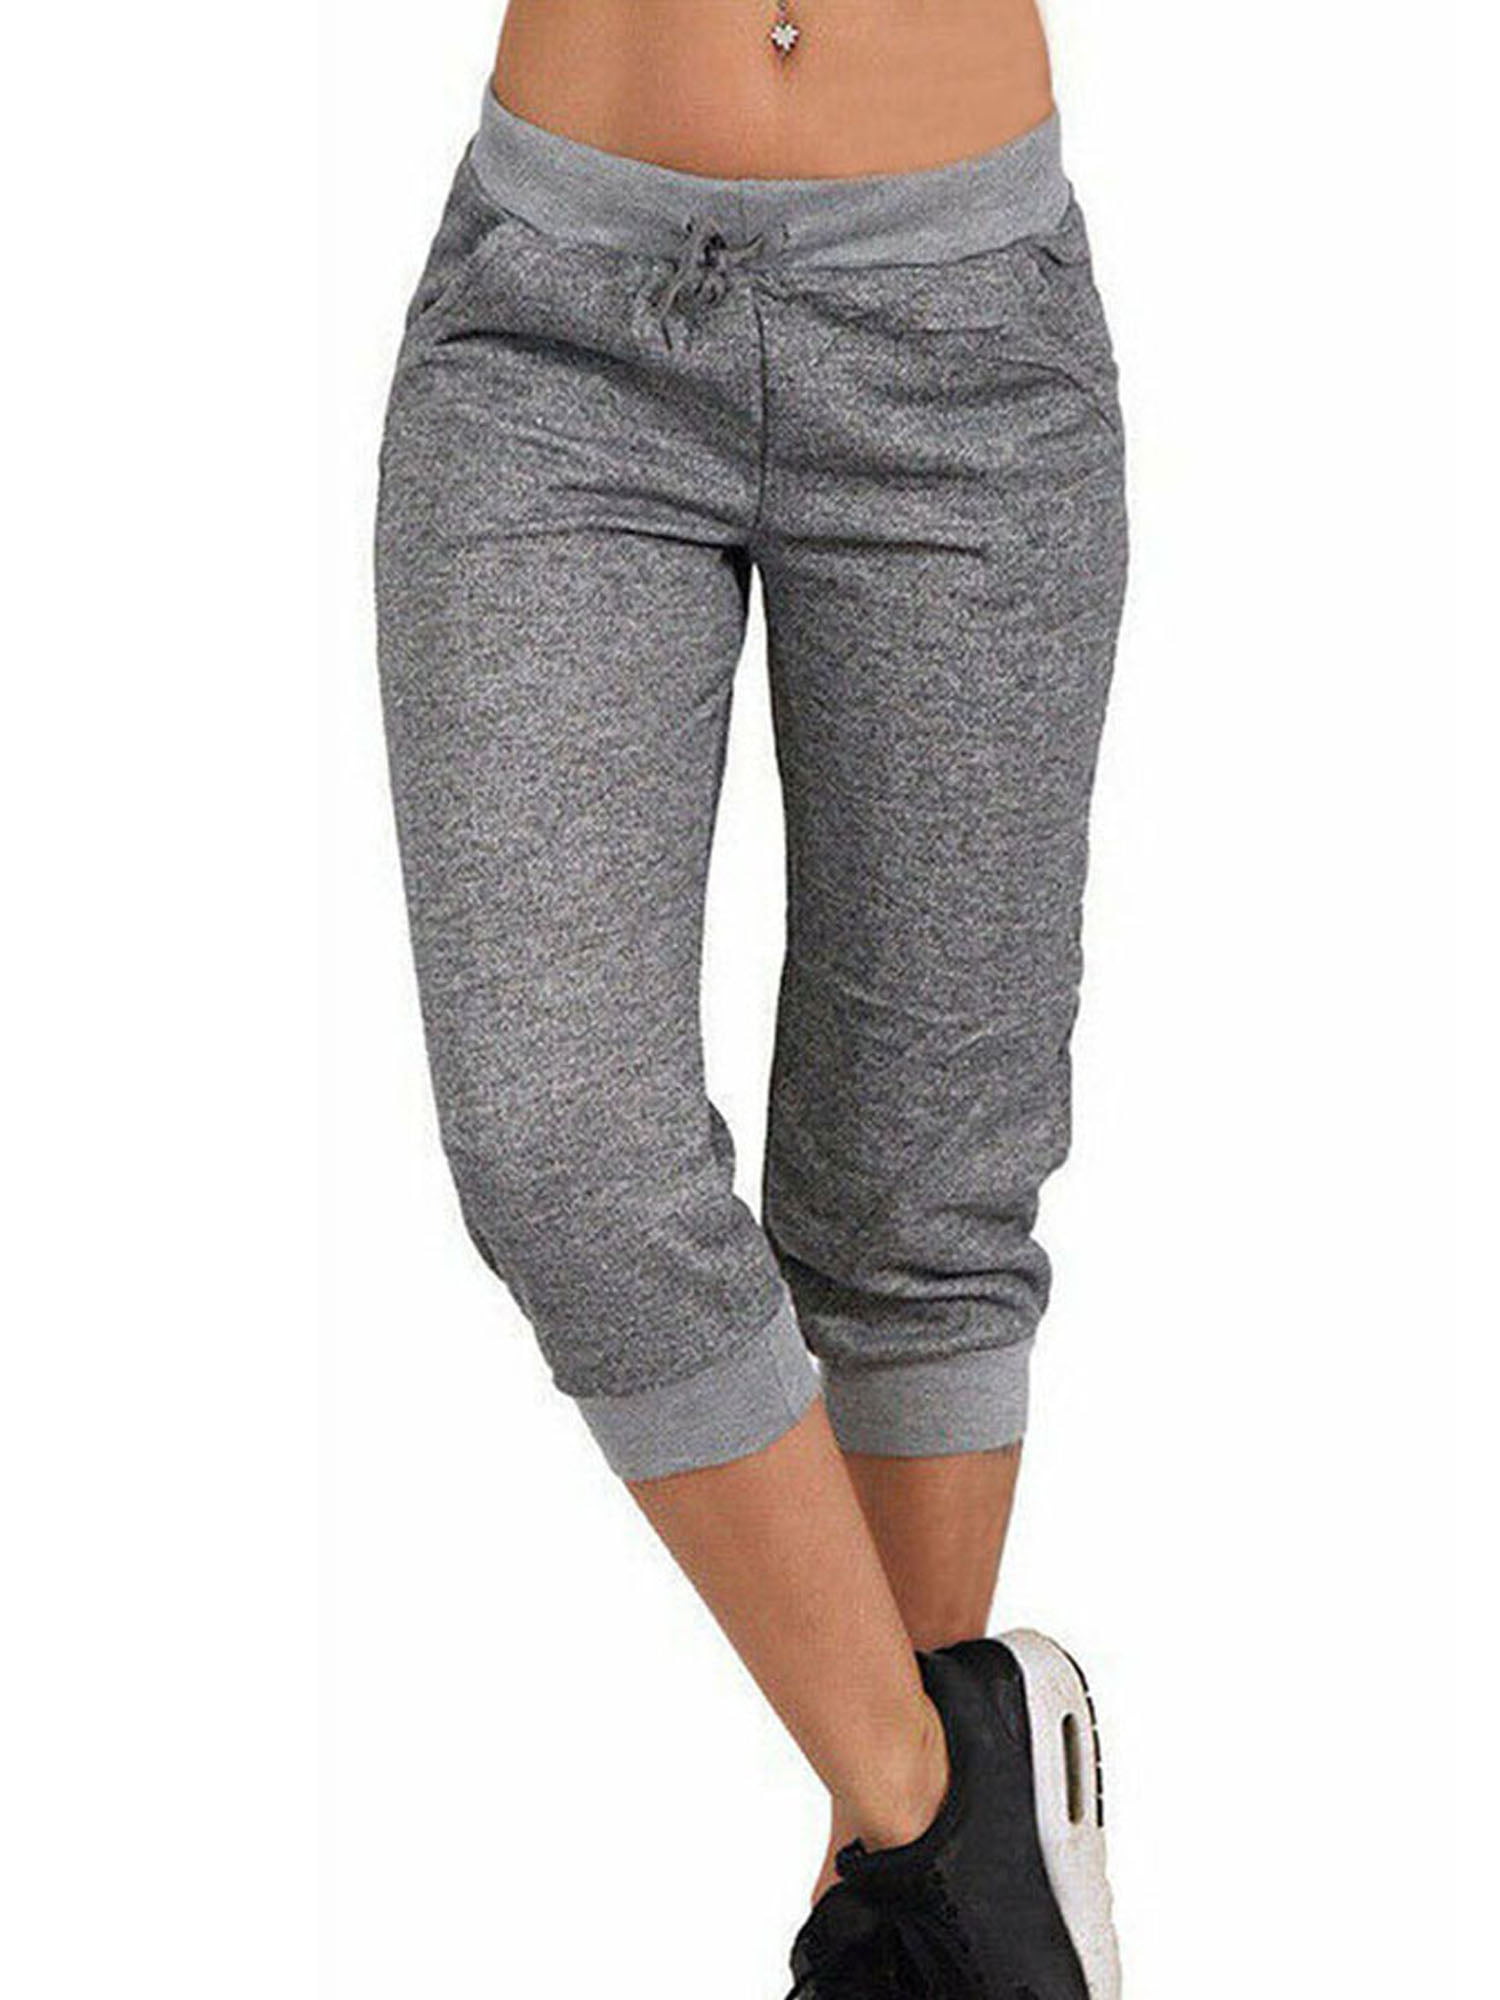 Lazybaby - Lazybaby Womens Cotton Sweatpants Stretch Jogger Yoga ...